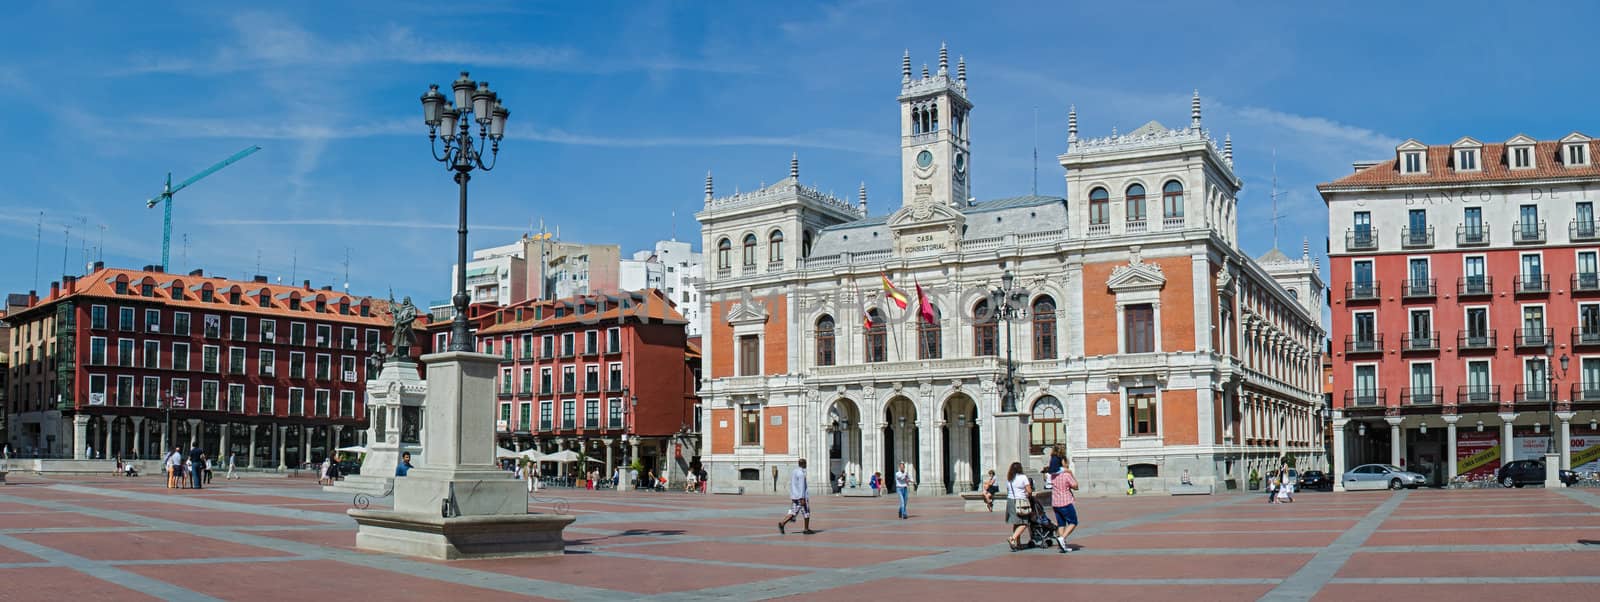 Plaza Mayor and the city hall of Valladolid by homydesign